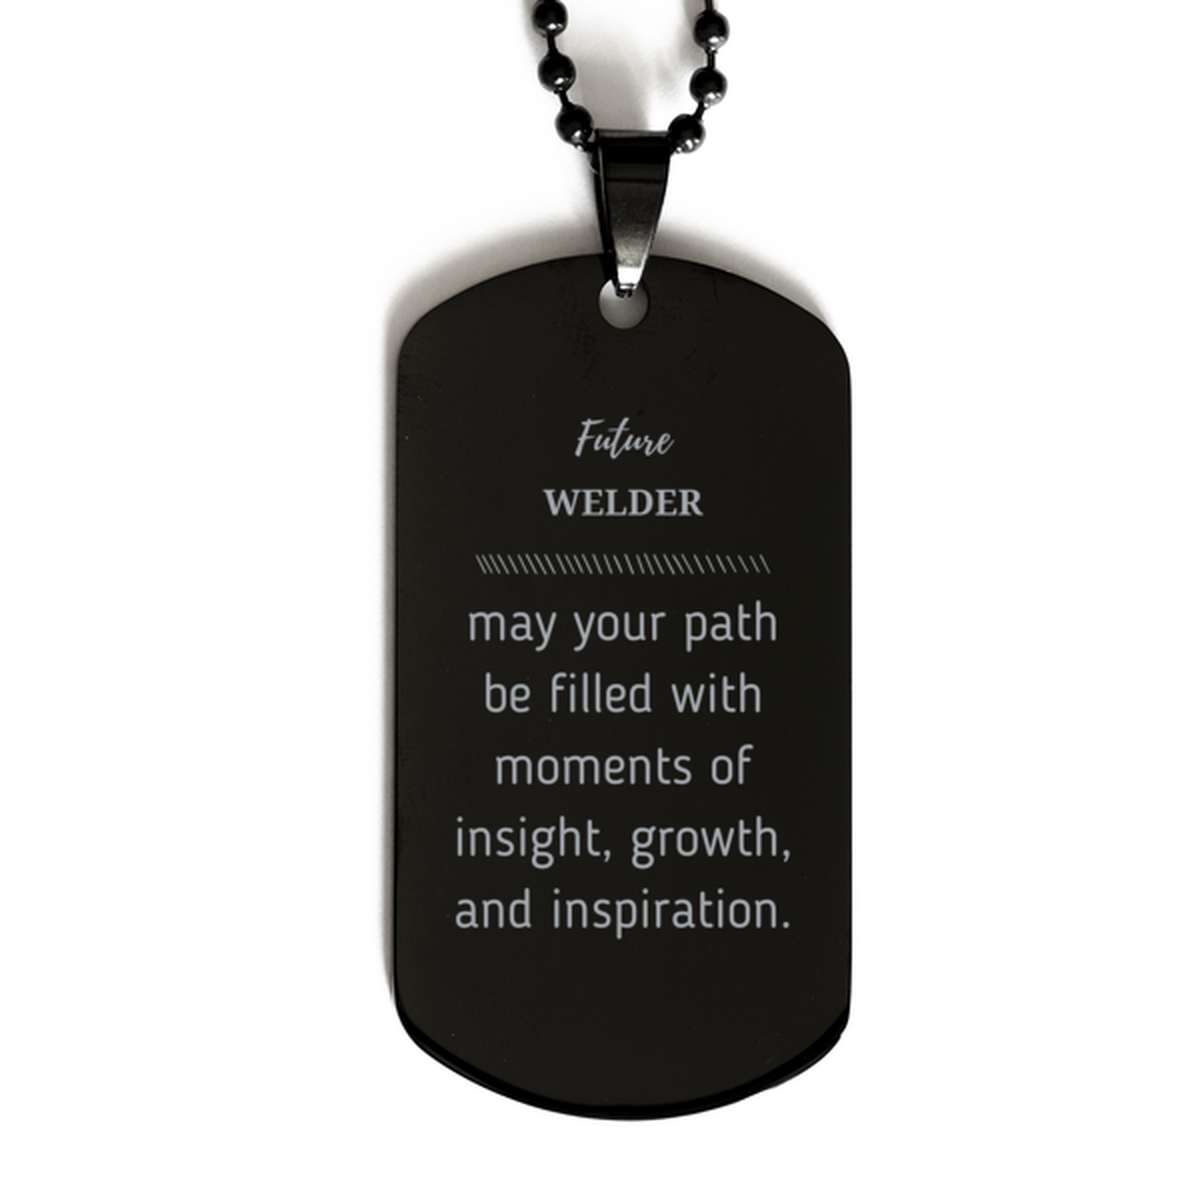 Future Welder Gifts, May your path be filled with moments of insight, Graduation Gifts for New Welder, Christmas Unique Black Dog Tag For Men, Women, Friends